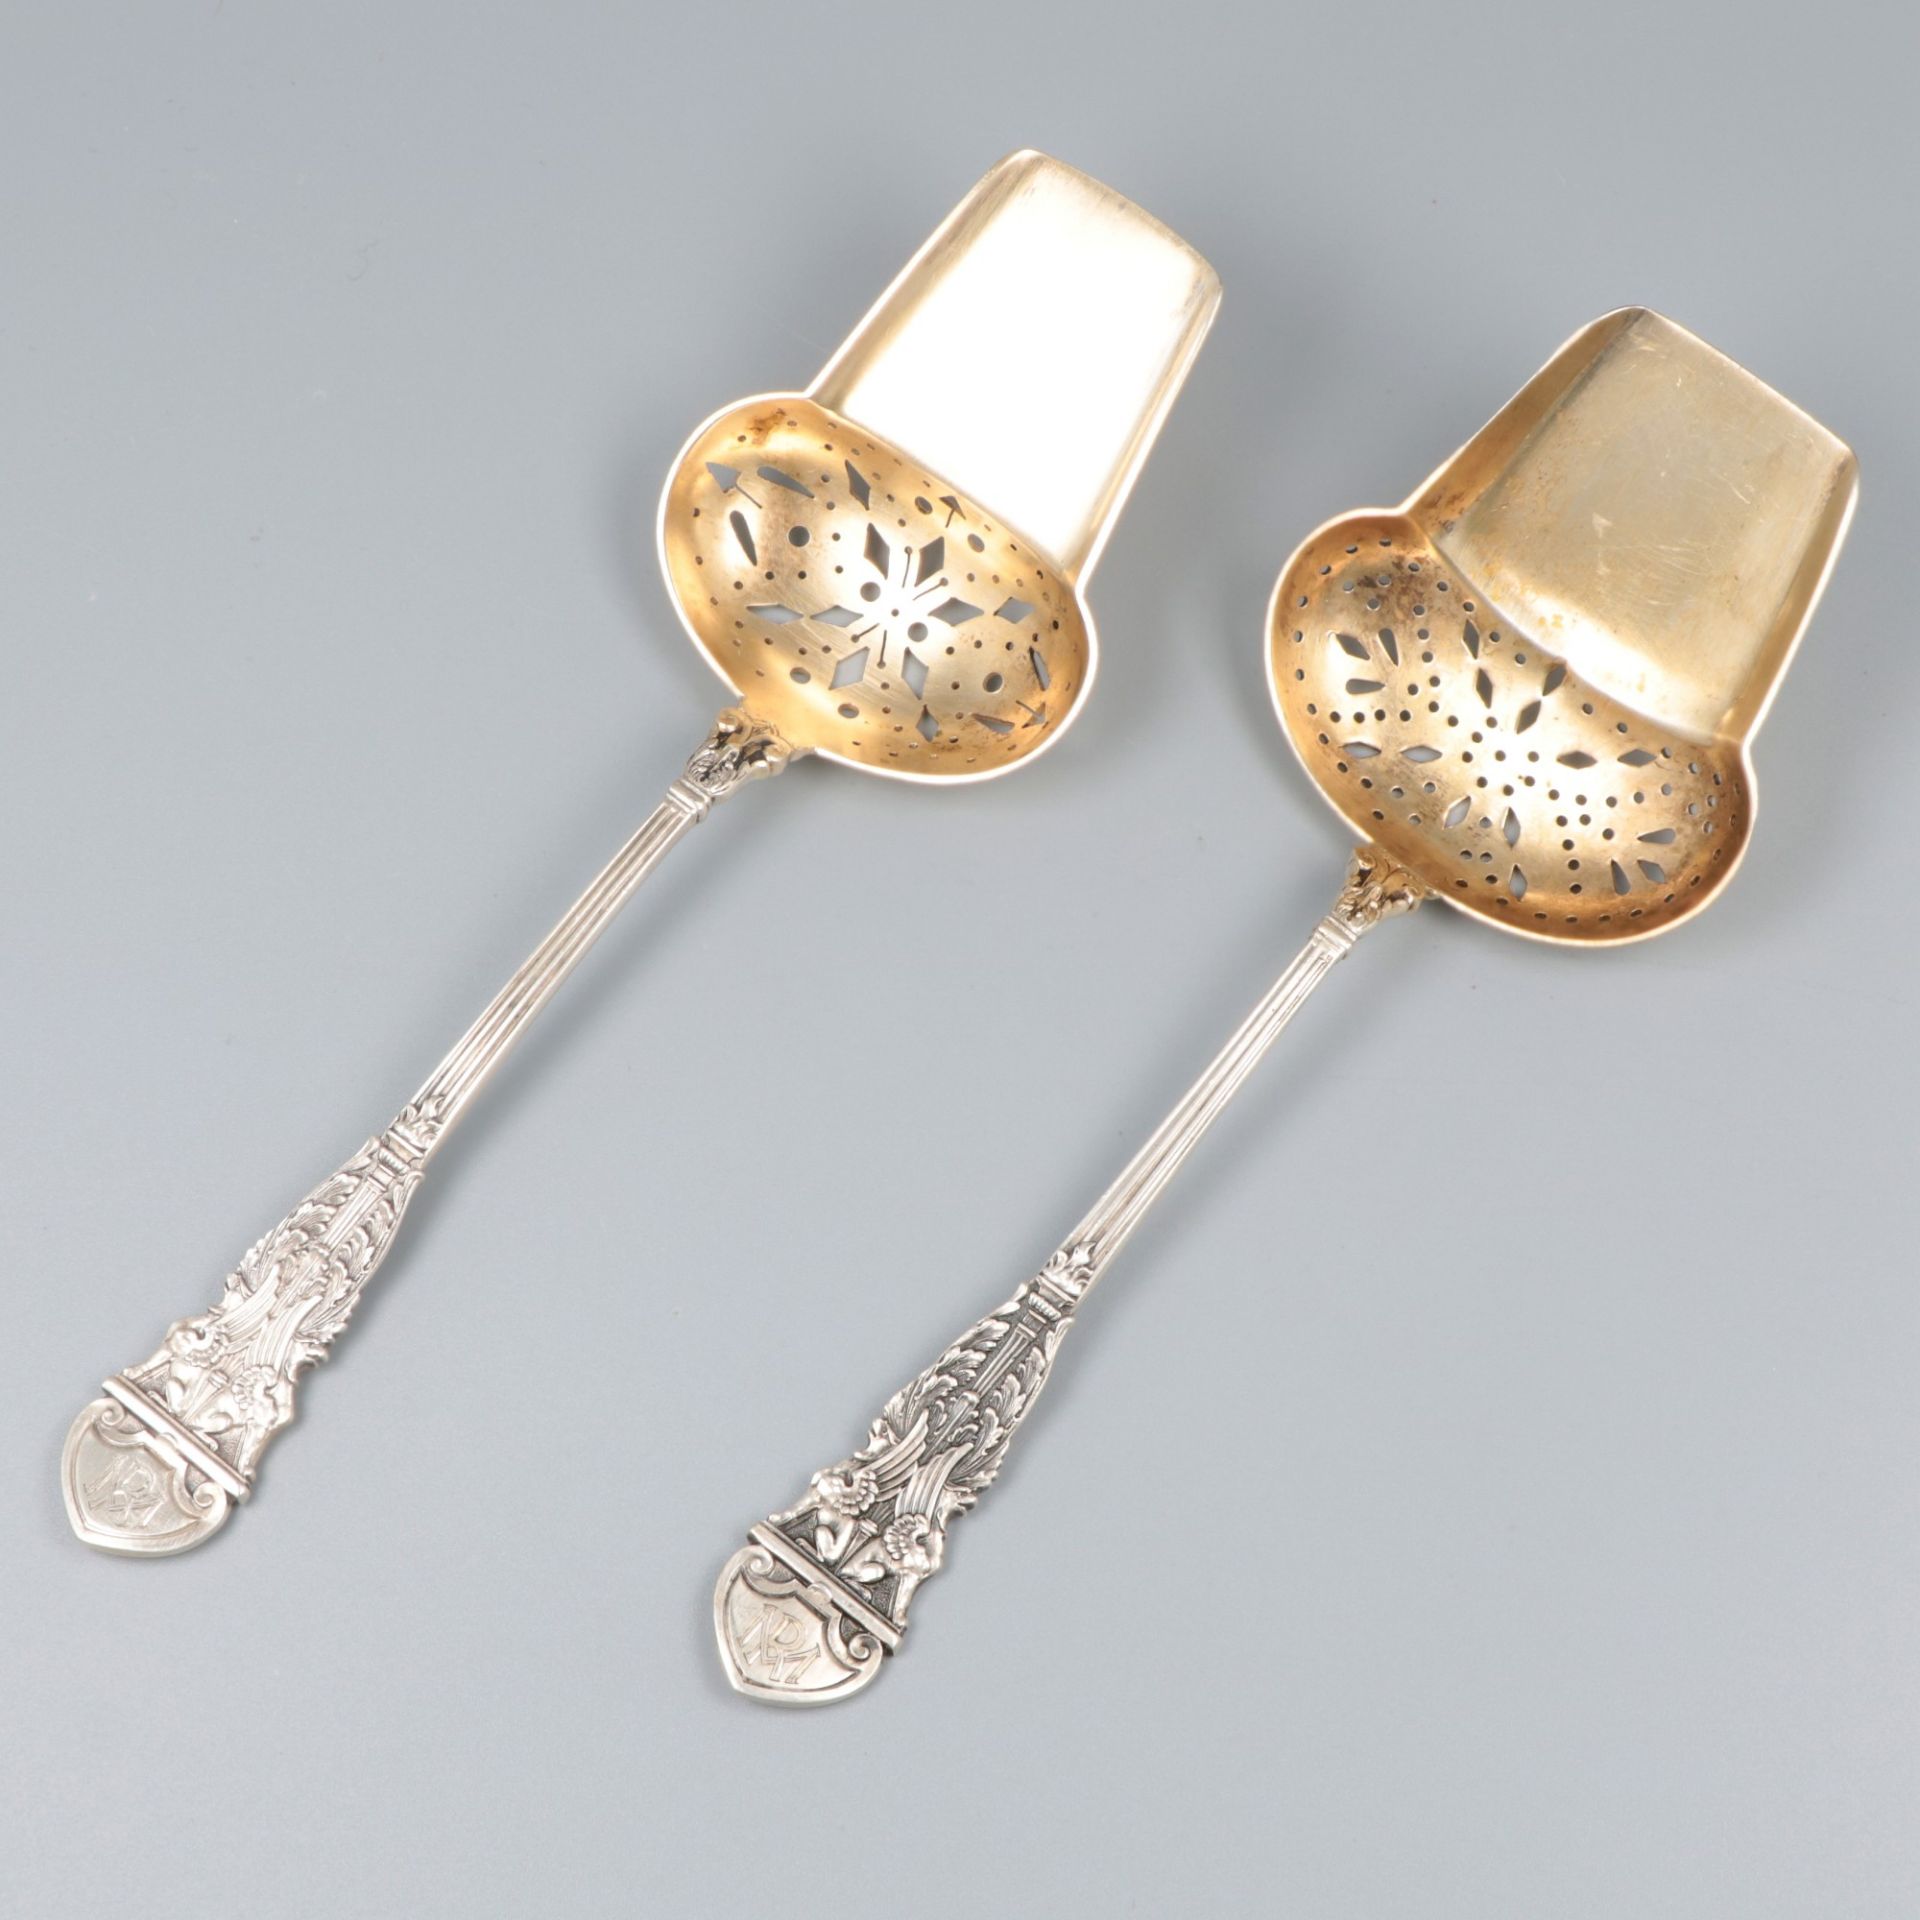 2-piece set of silver serving spoons. - Image 2 of 6